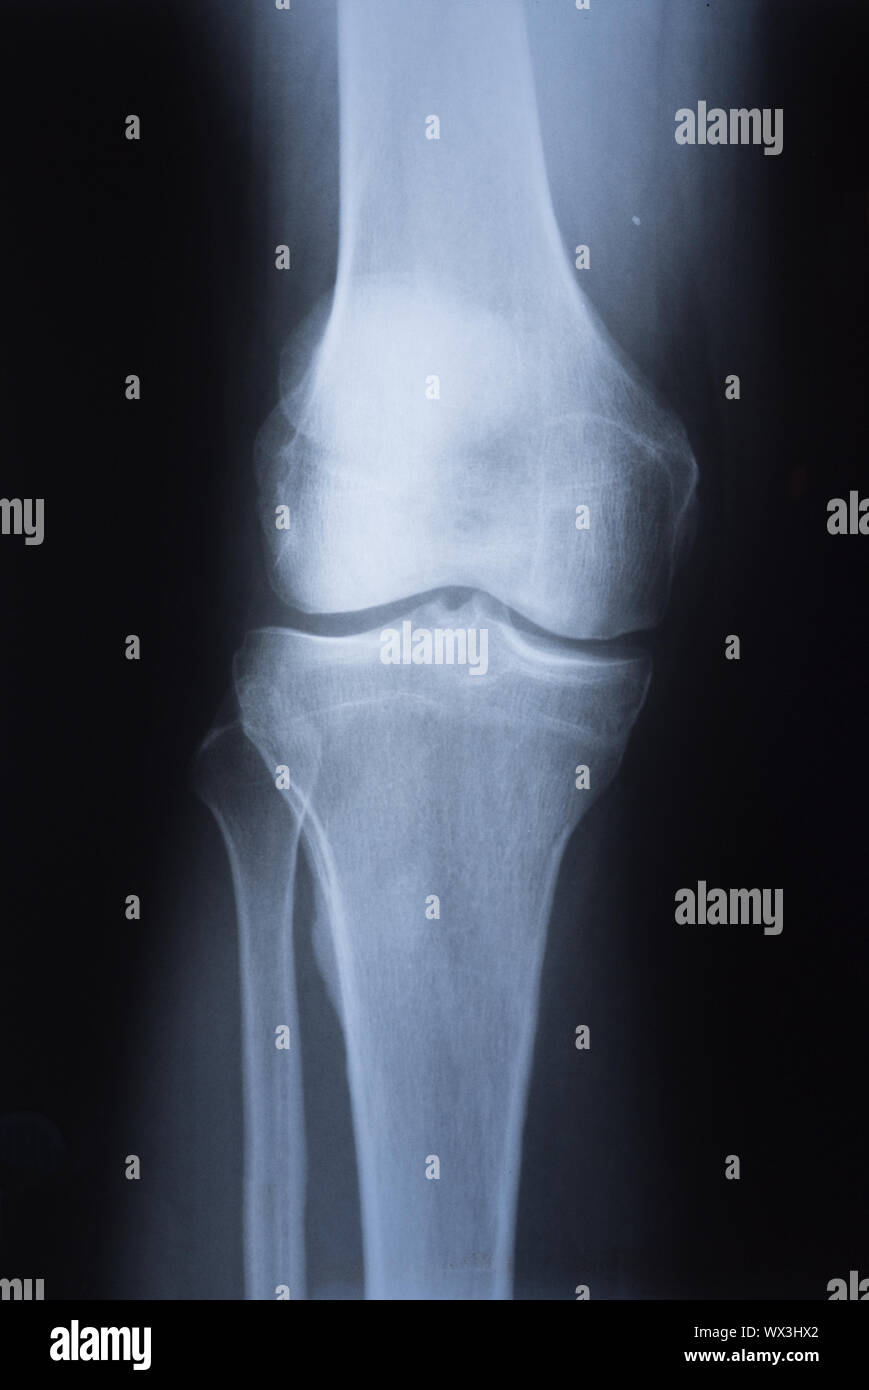 medical X ray image of knee Stock Photo